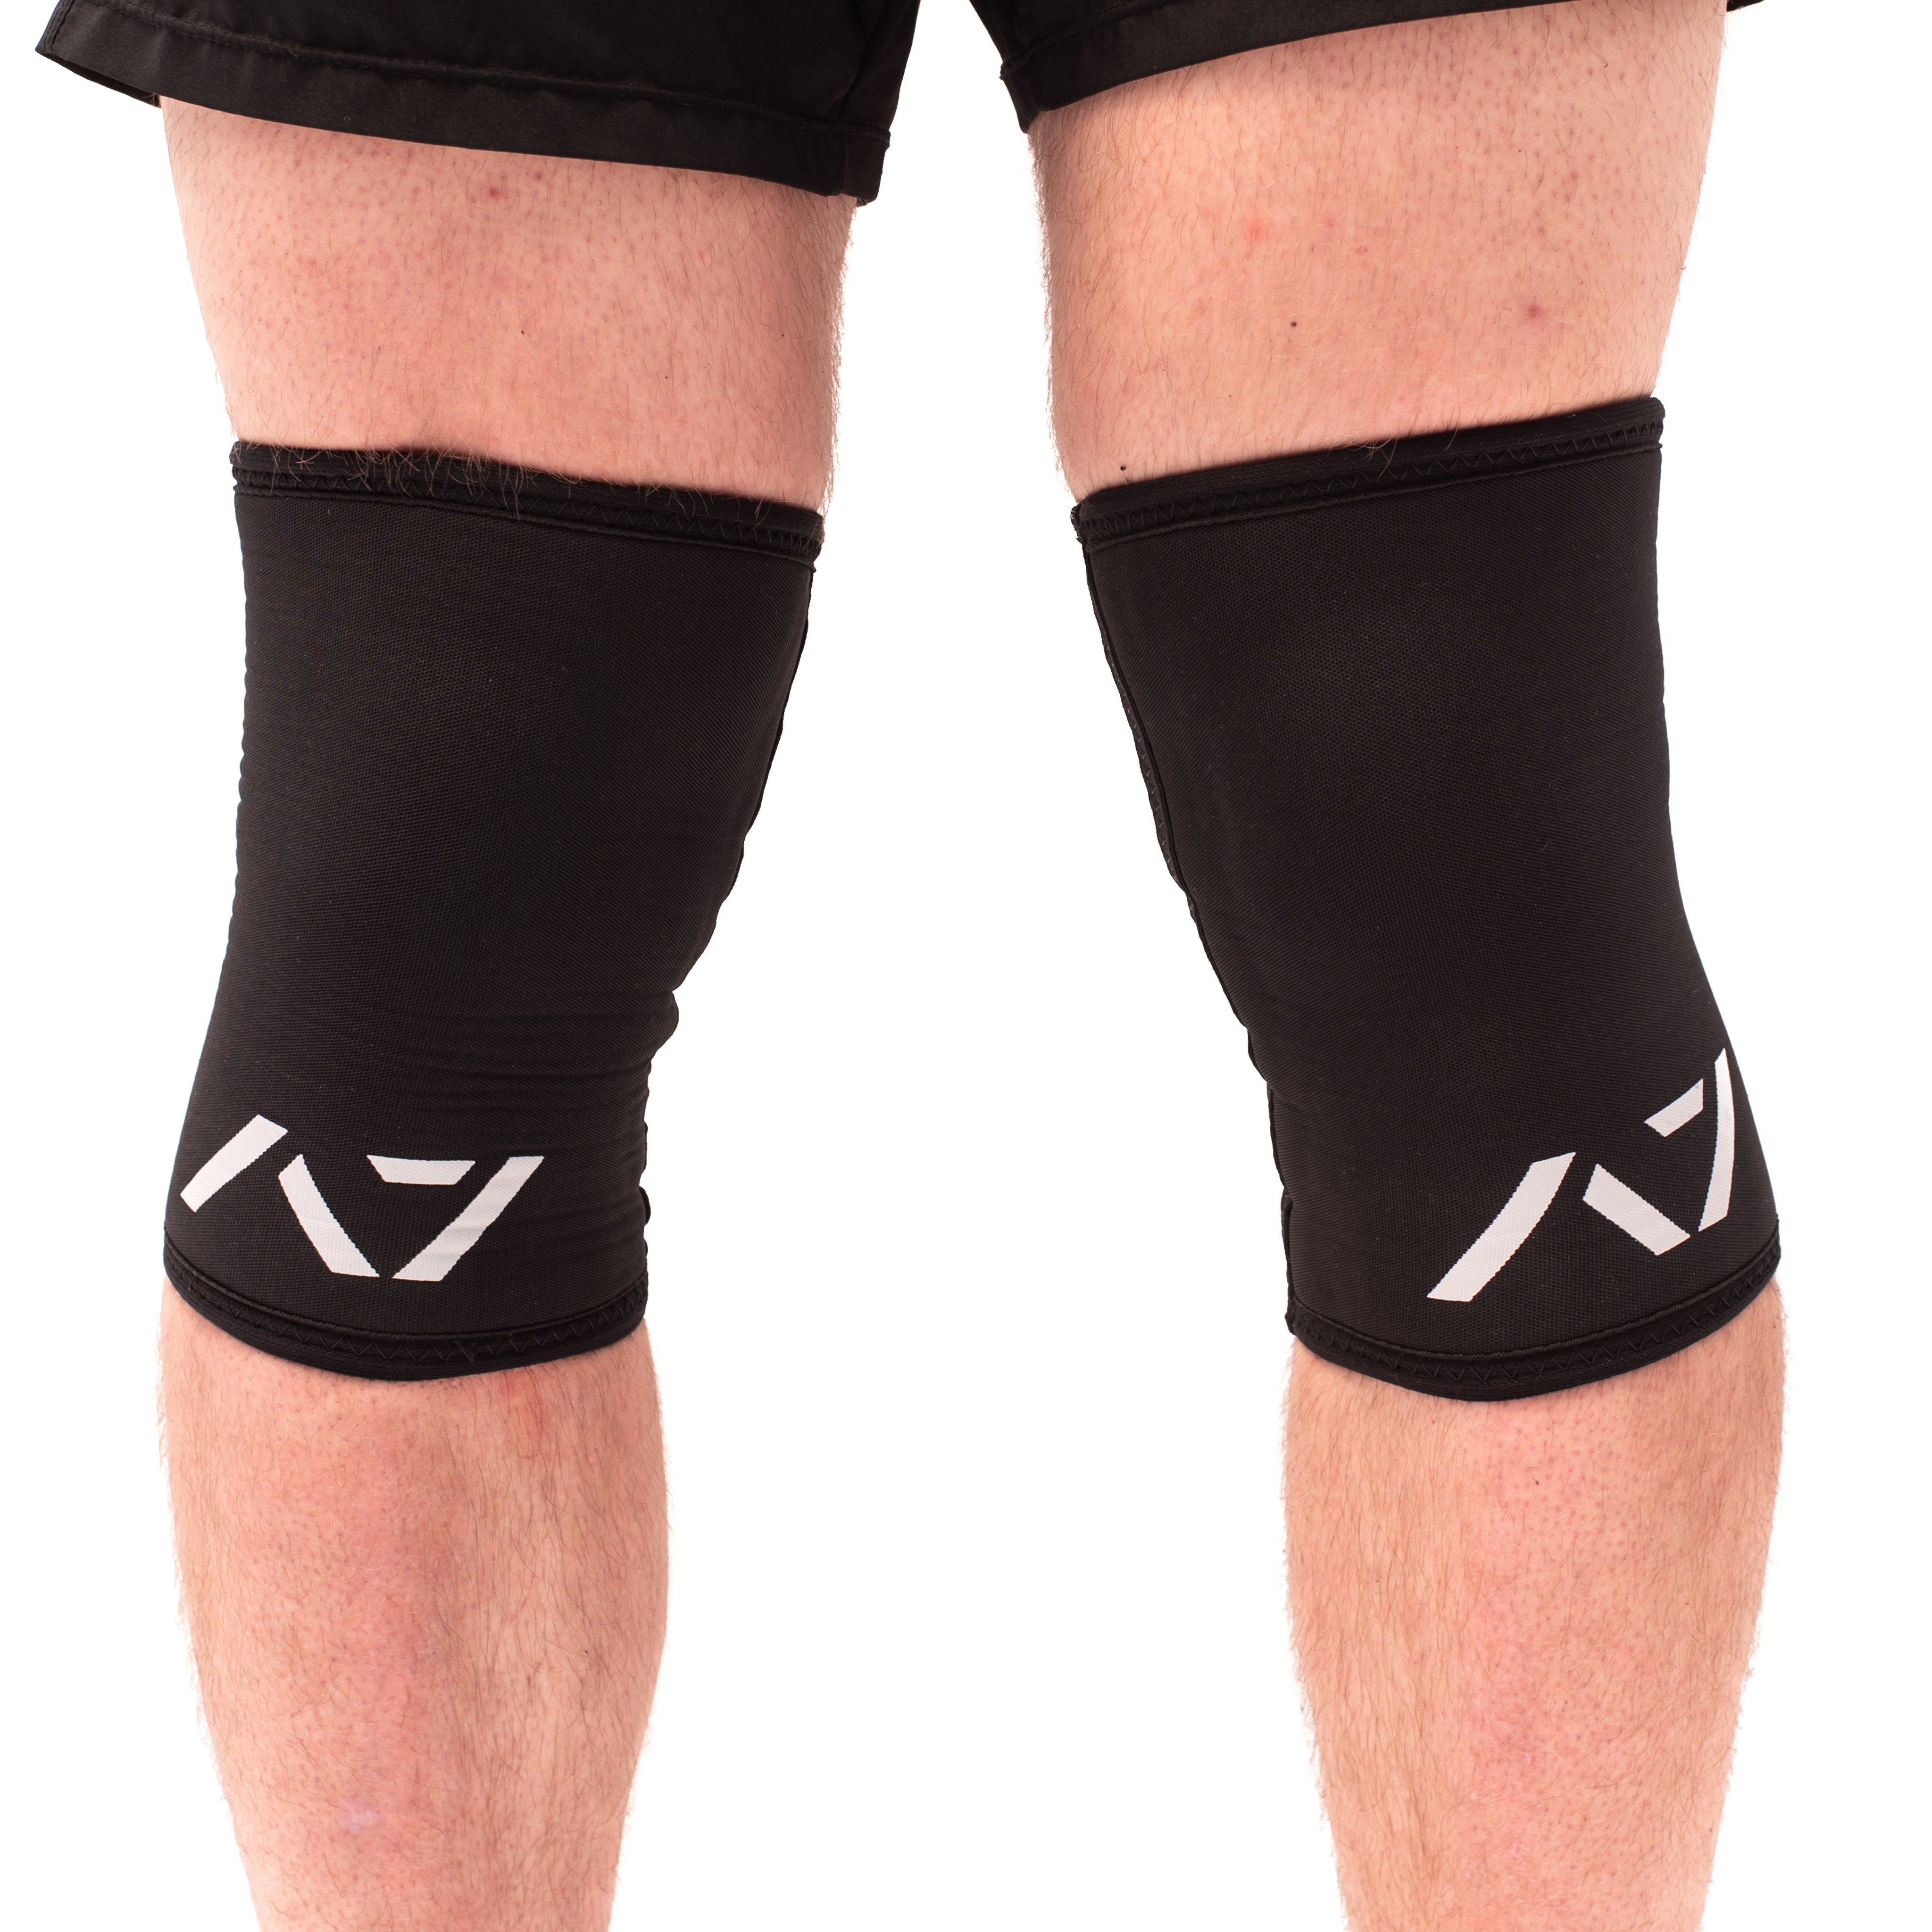 Calf Compression Sleeves and Leg Wraps 4 Piece Shin Palestine